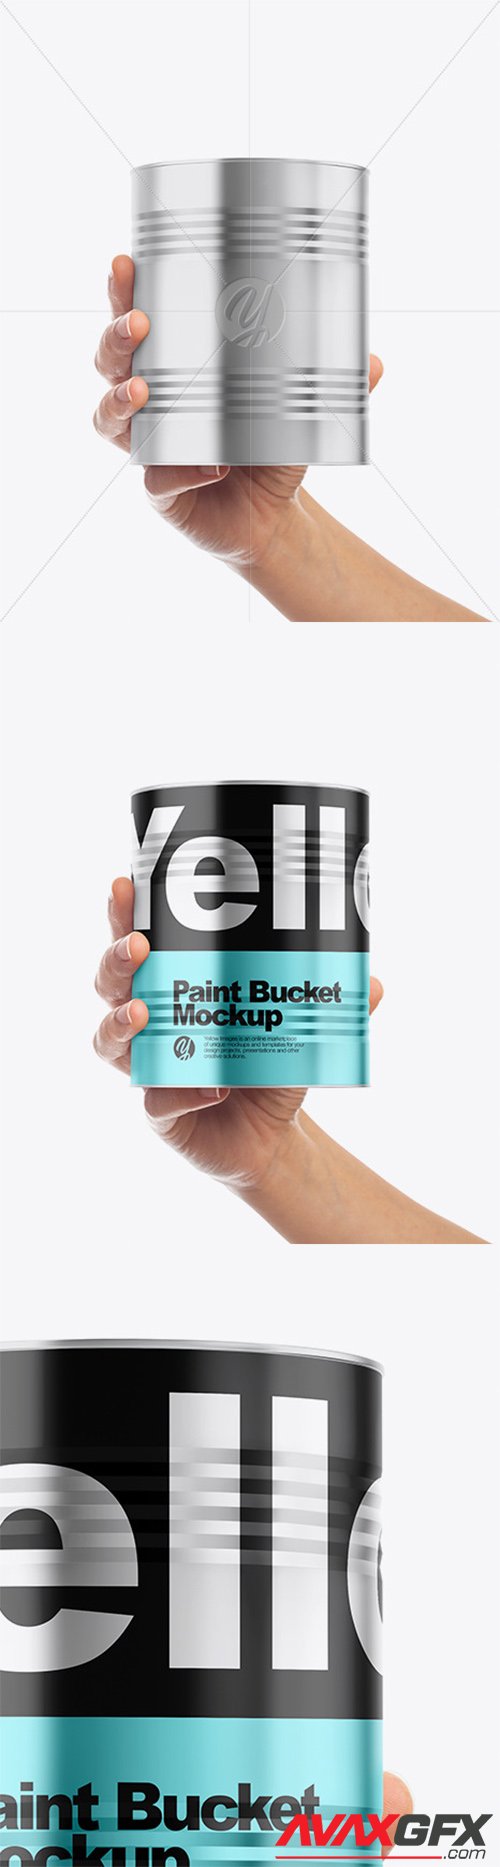 Download Metallic Paint Bucket In Hand Mockup Front View 60761 Avaxgfx All Downloads That You Need In One Place Graphic From Nitroflare Rapidgator